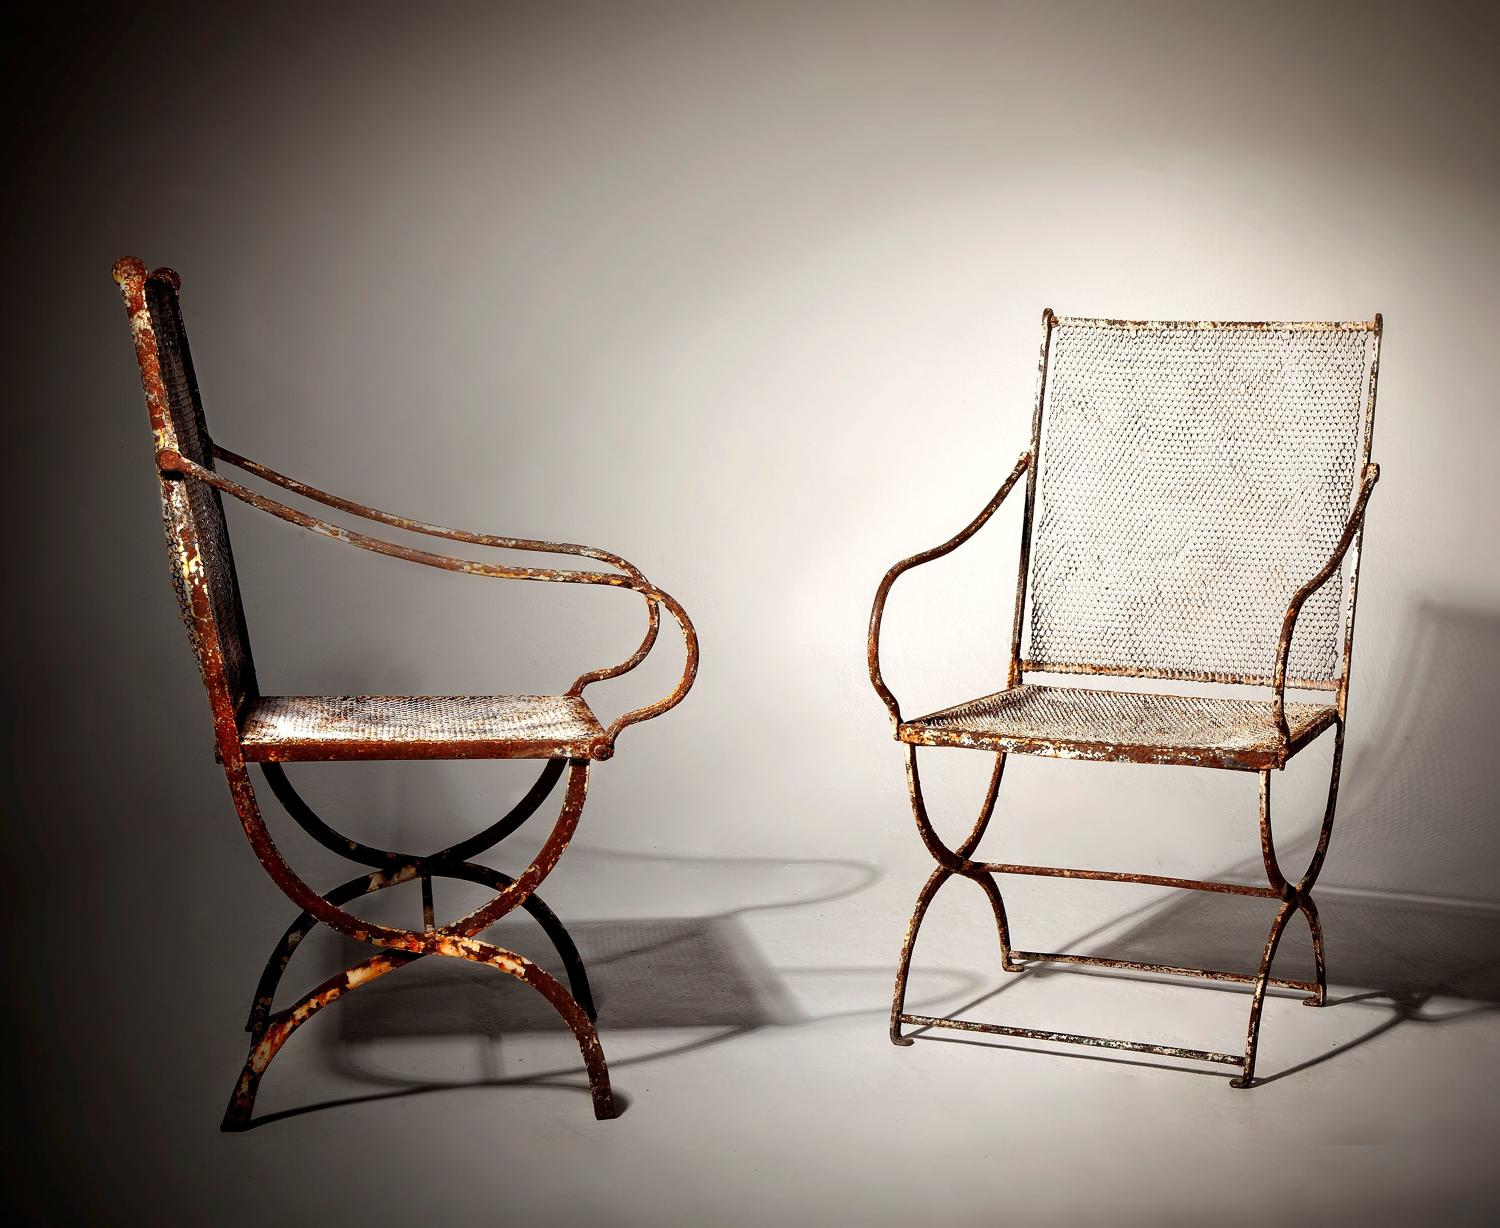 A pr of early 20th century garden chairs